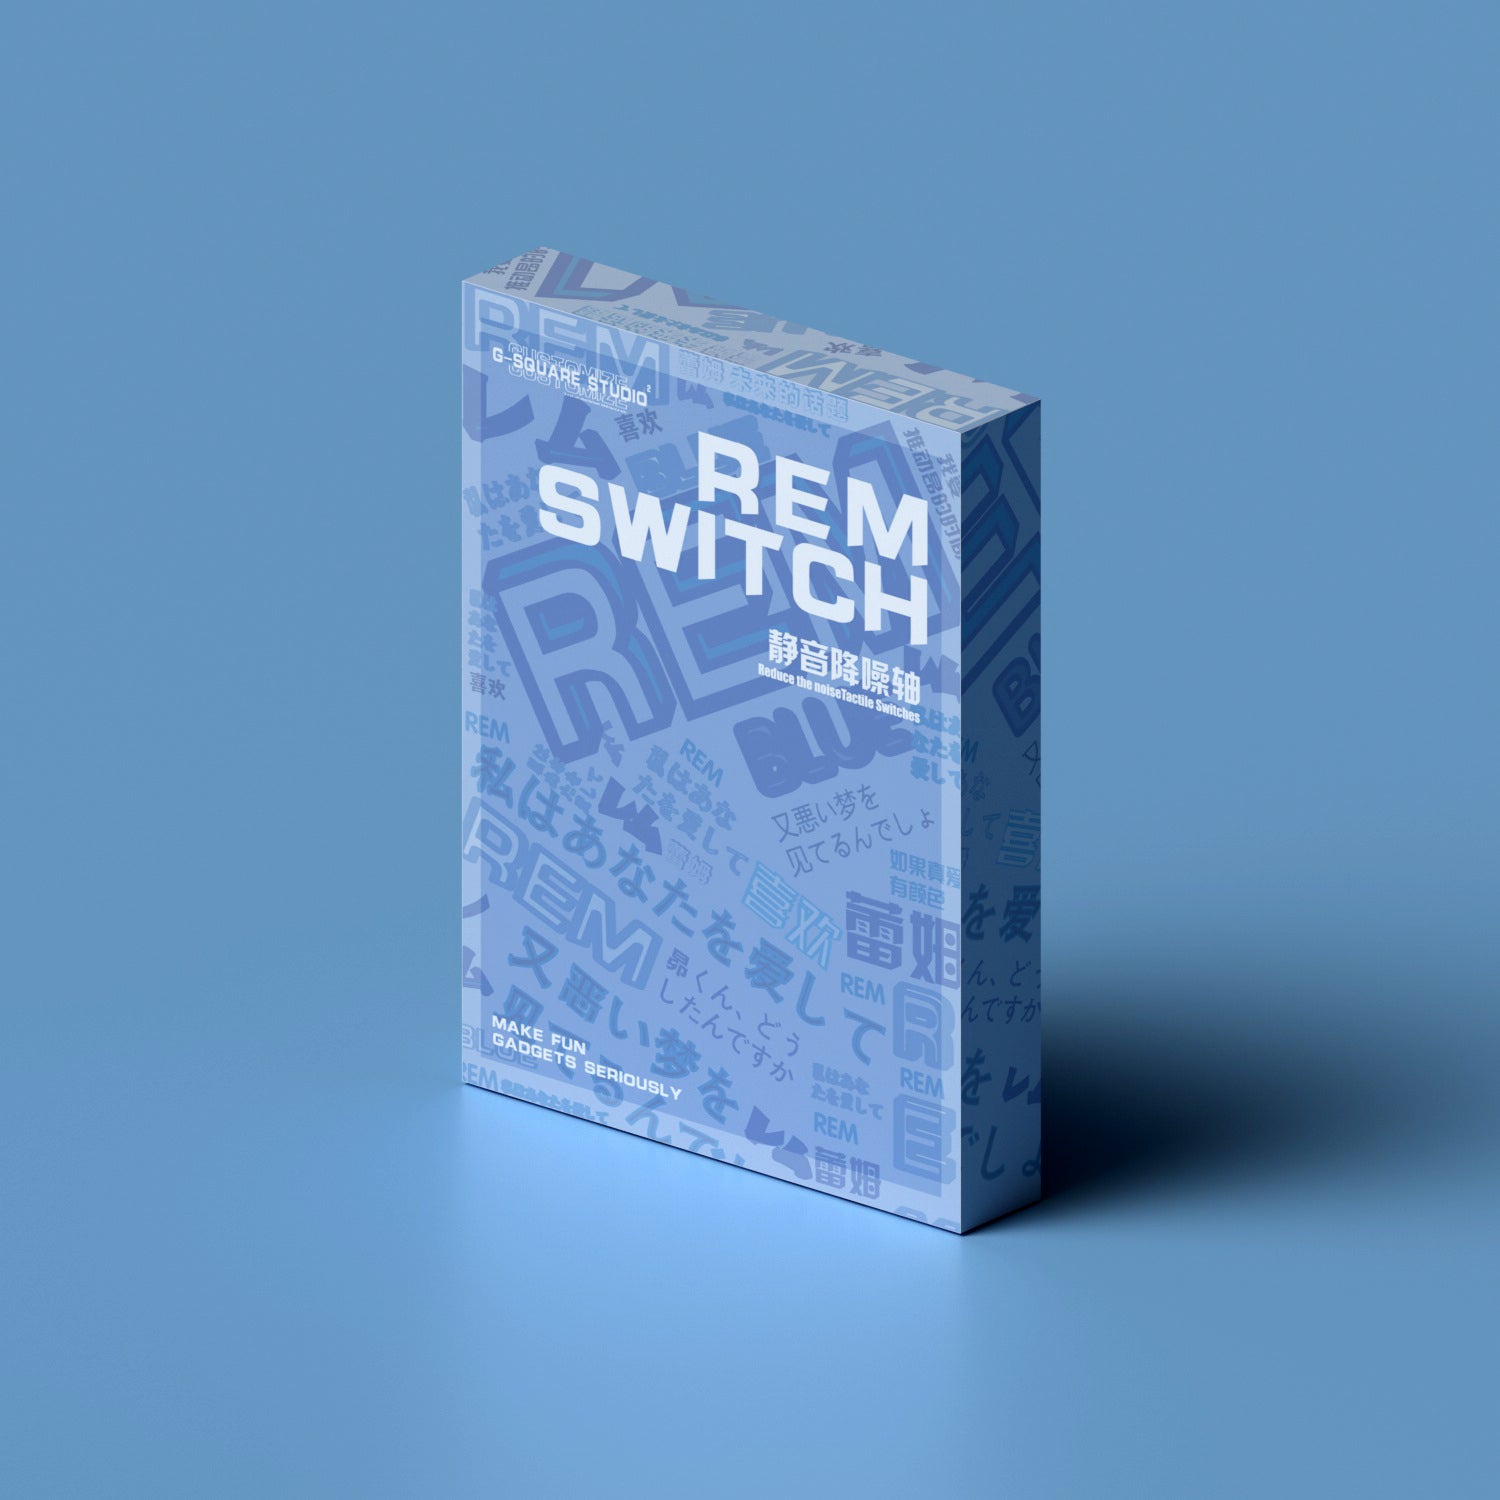 [In Stock] Ram & Rem Switches - Silent Ver.